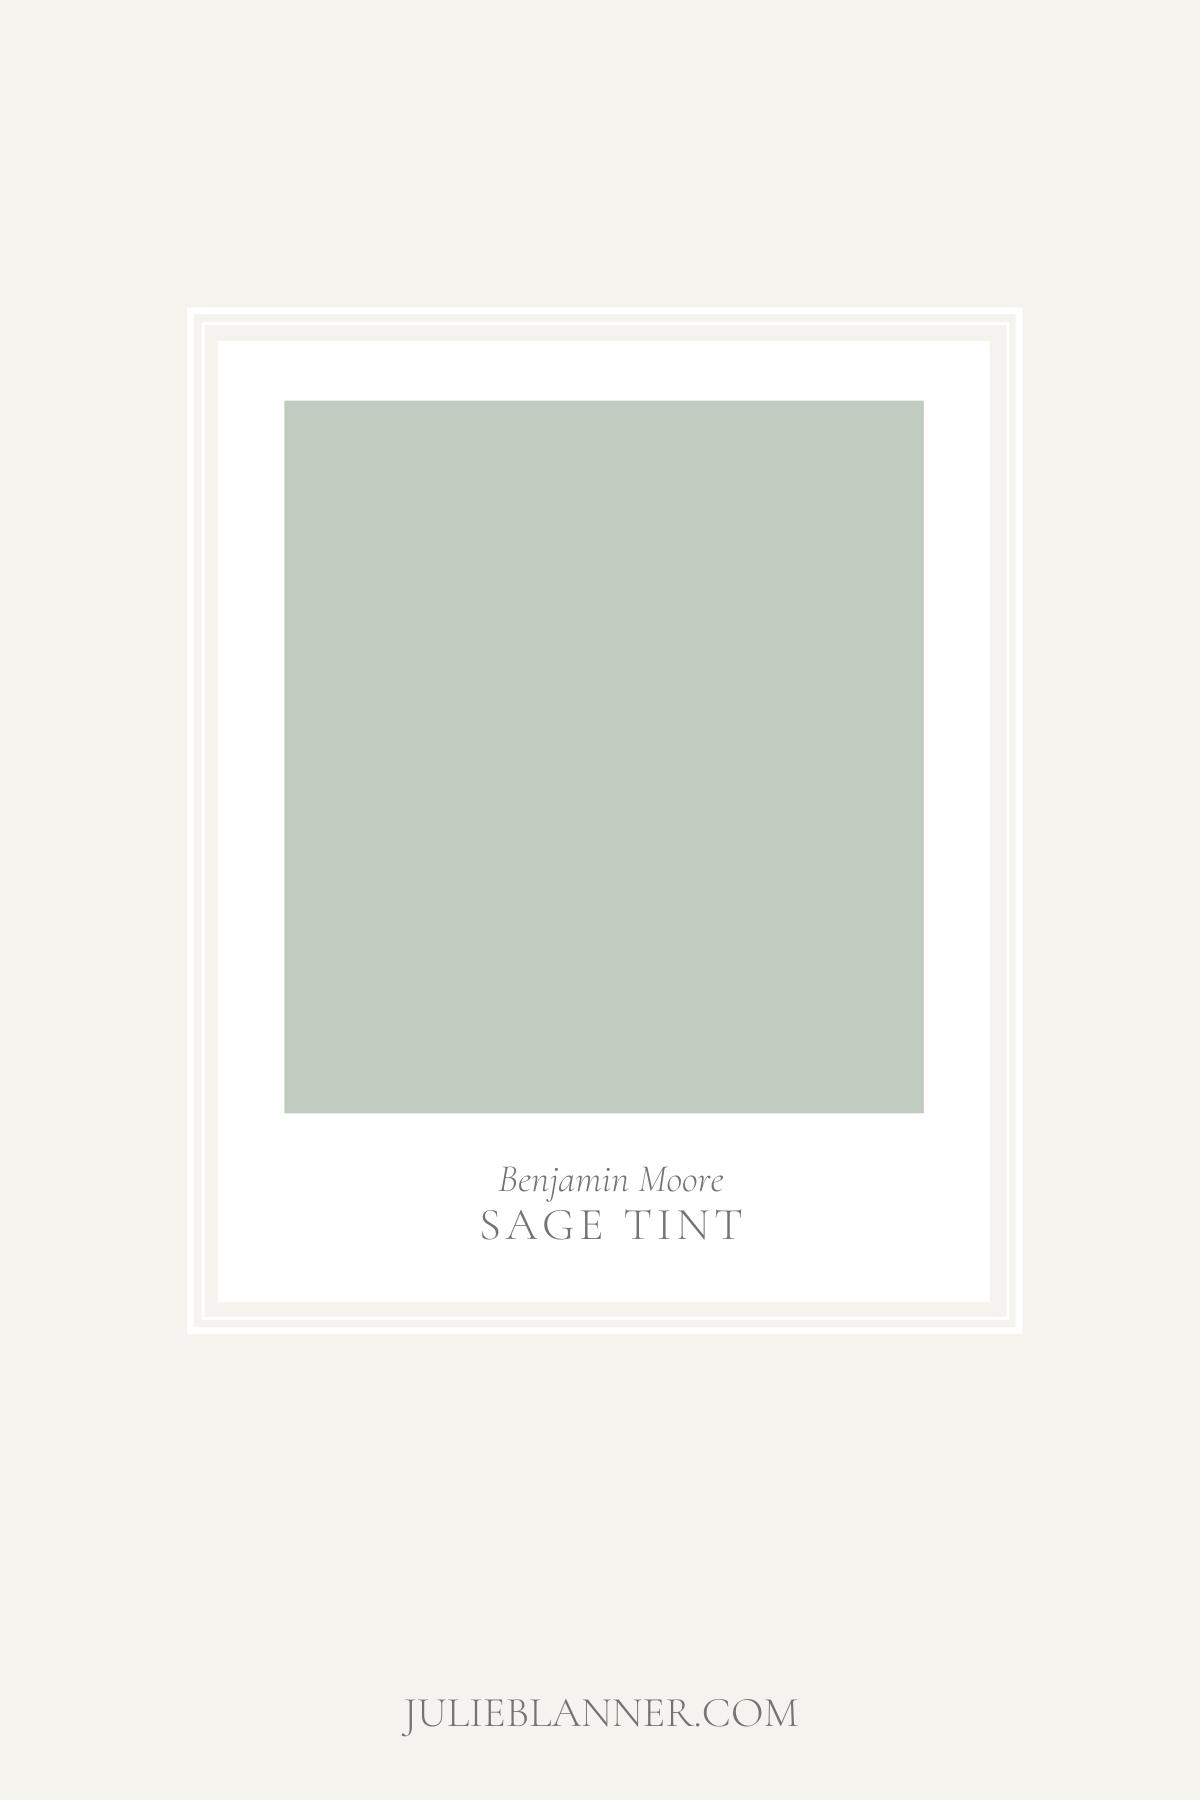 A paint swatch card of Benjamin Moore Sage Tint from www.julieblanner.com